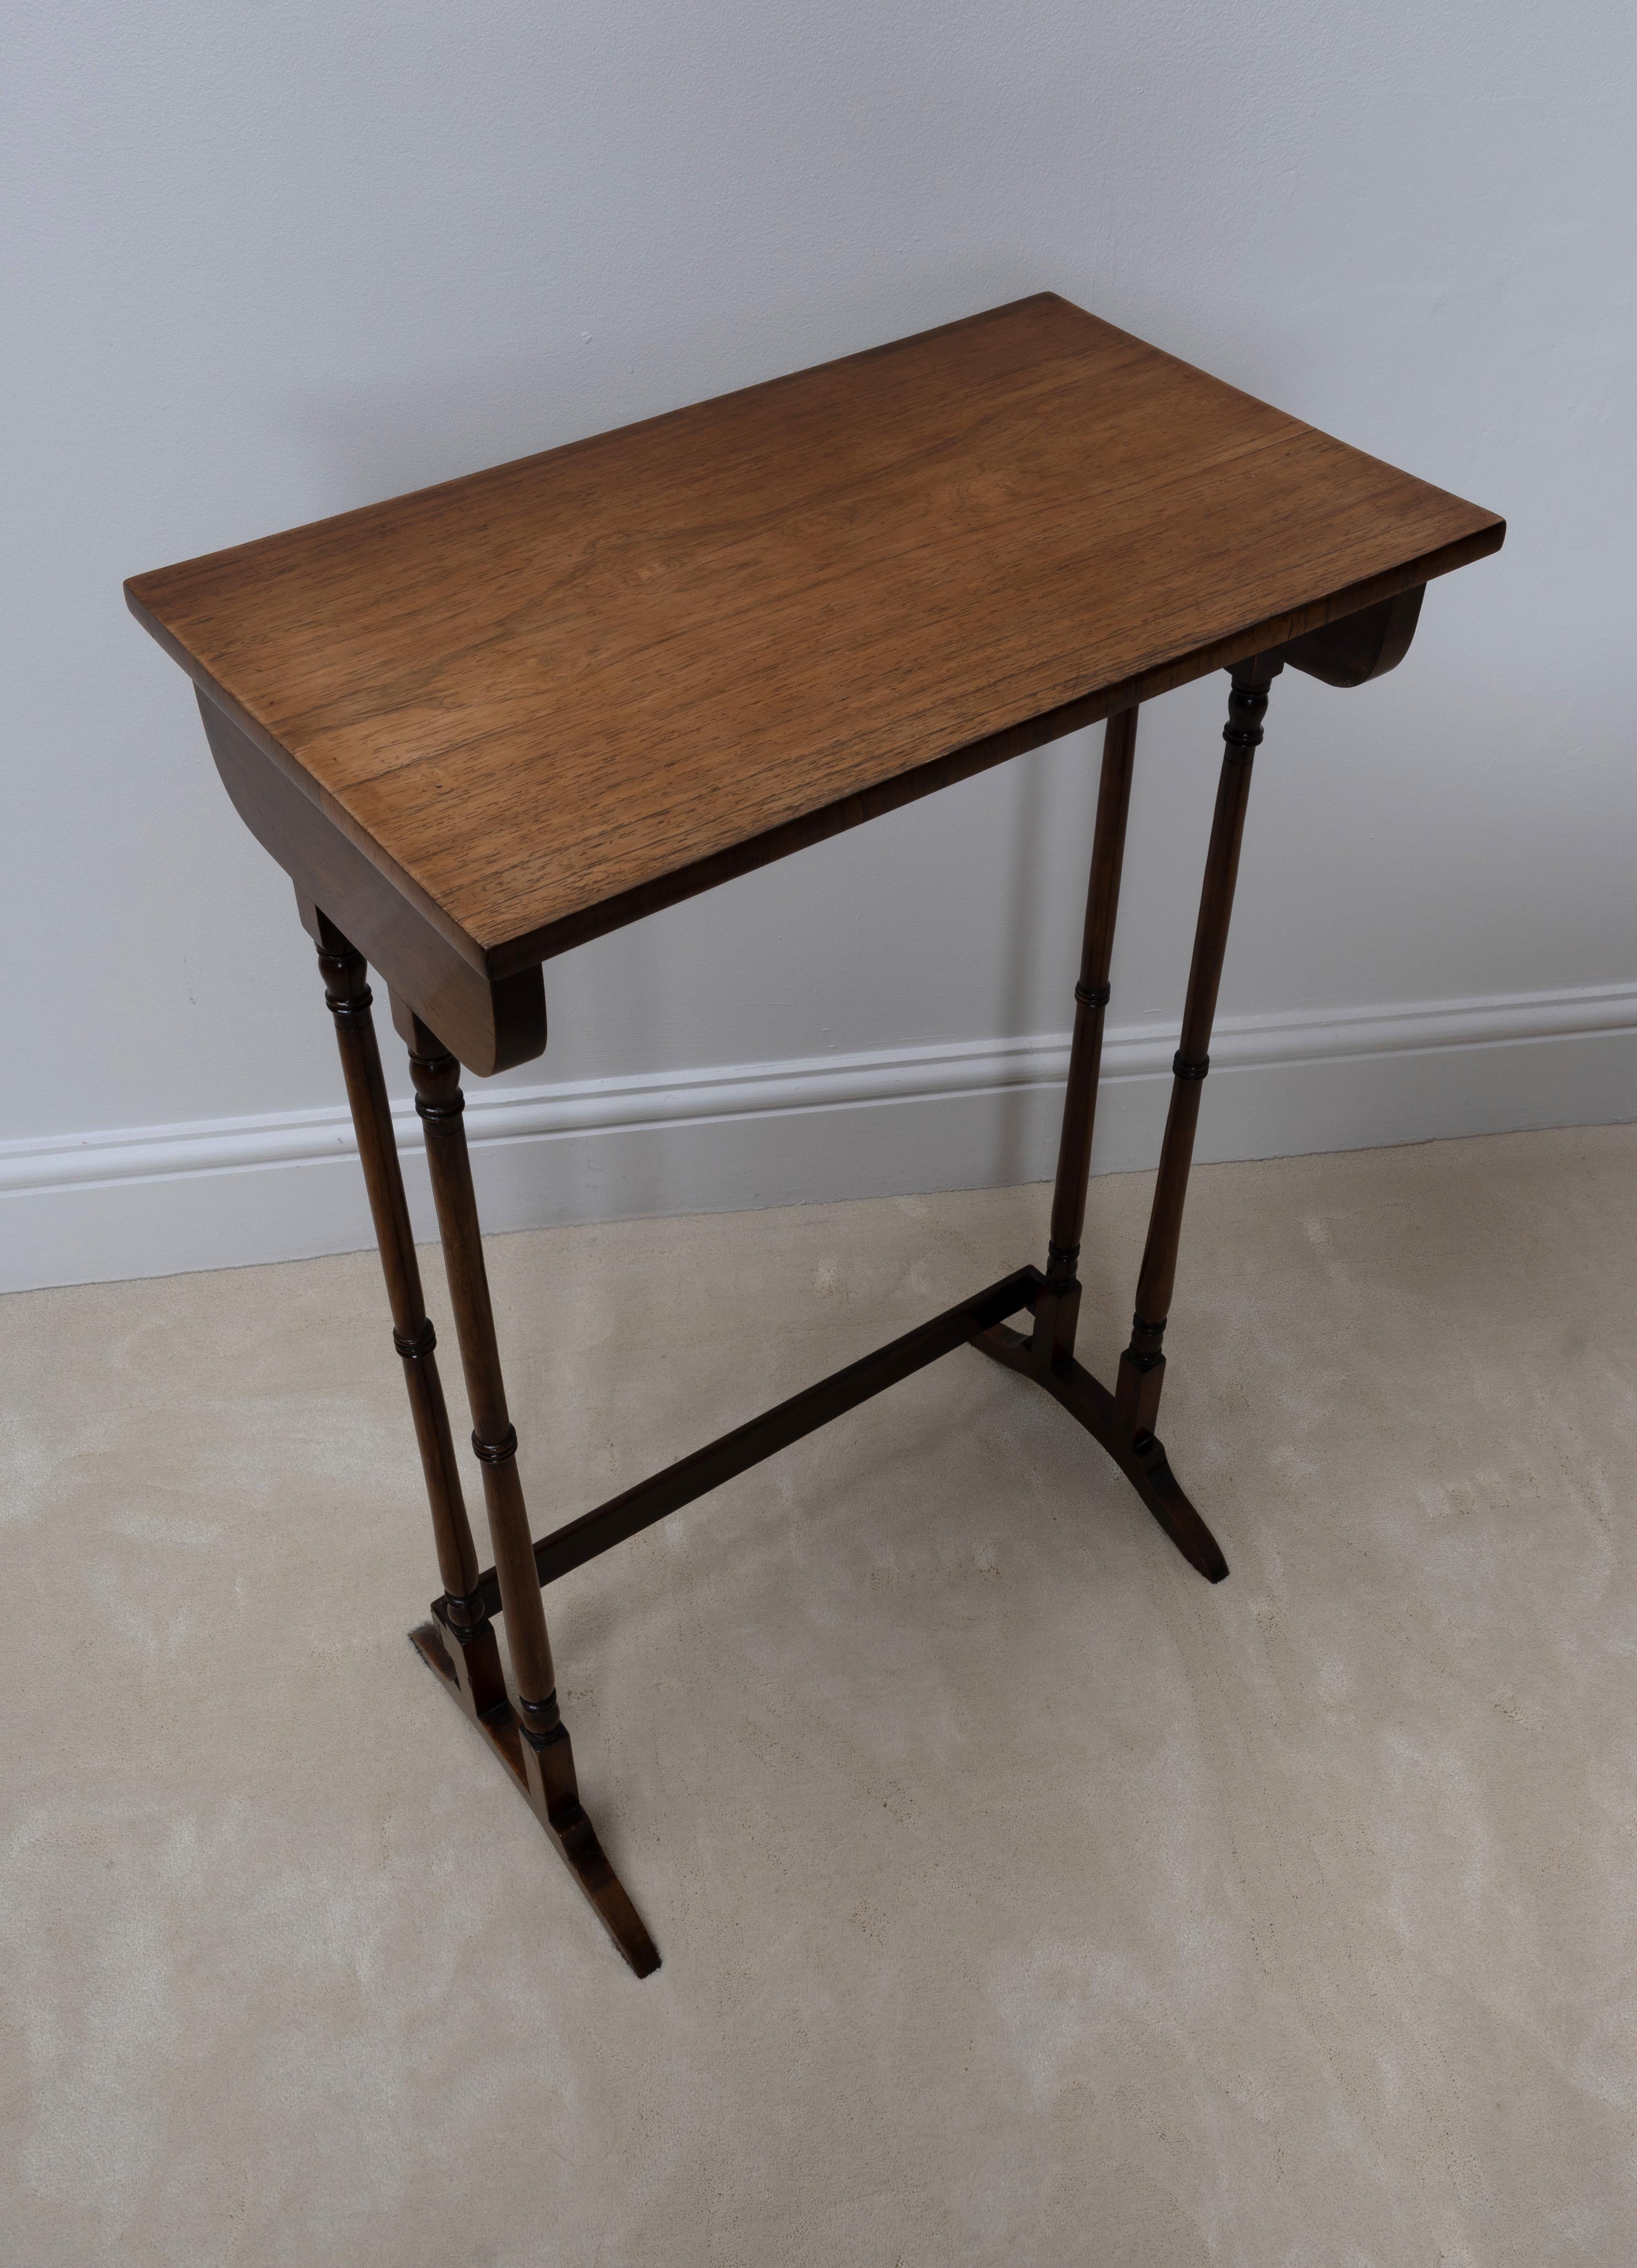 Antique English Regency Revival Rosewood Quartetto Of Nesting Table C.1820 For Sale 4